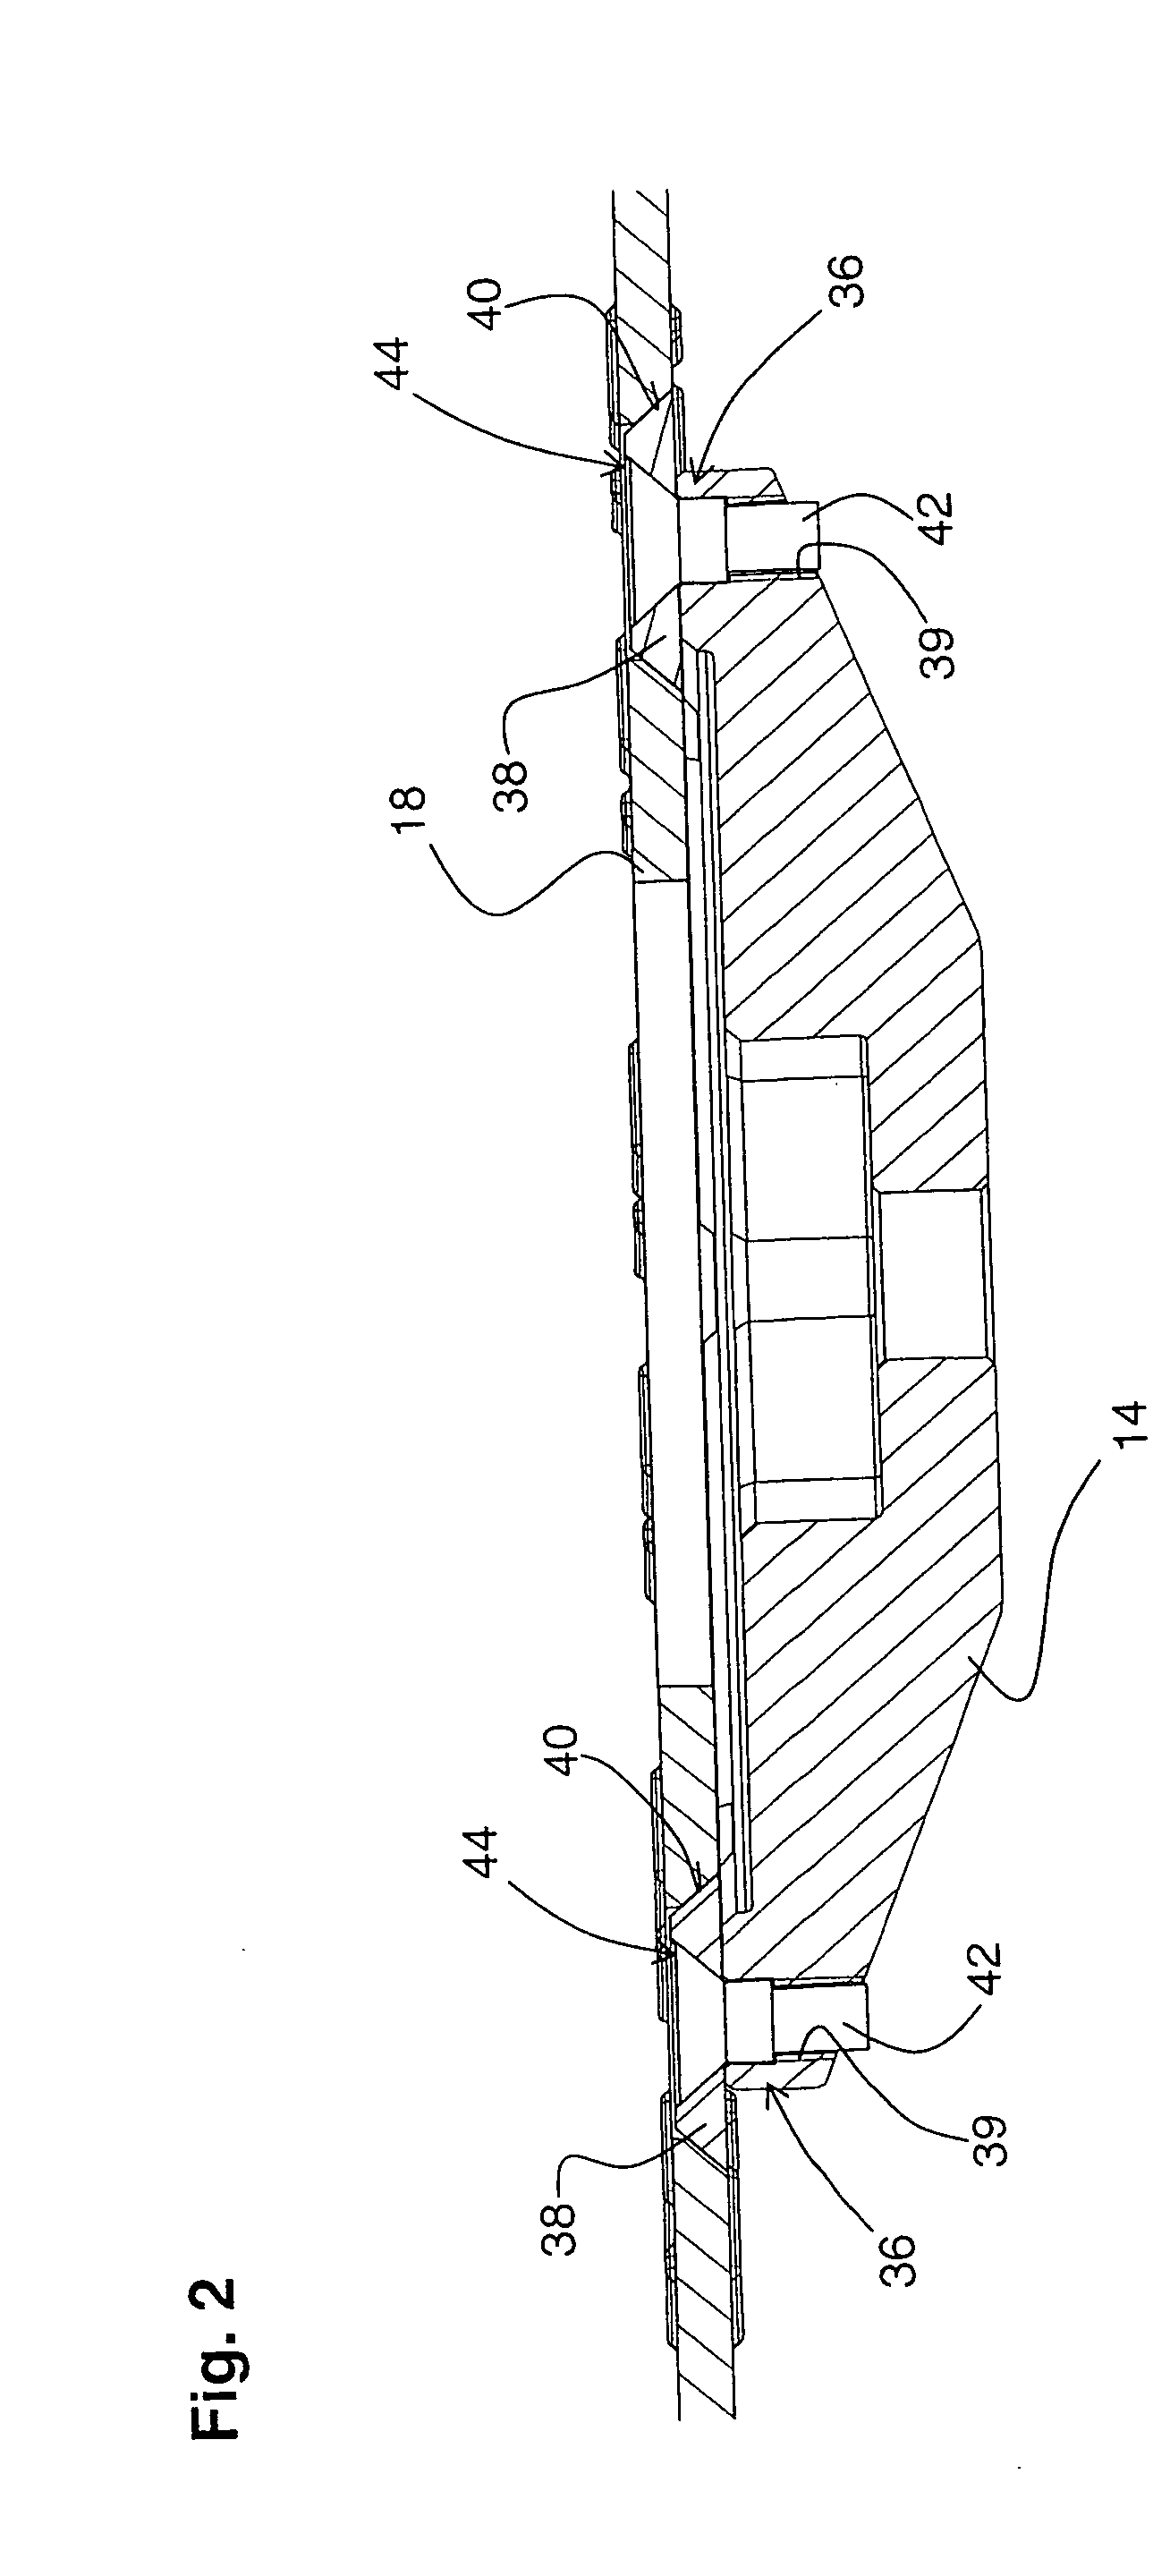 Tool holder for a disc-shaped working tool